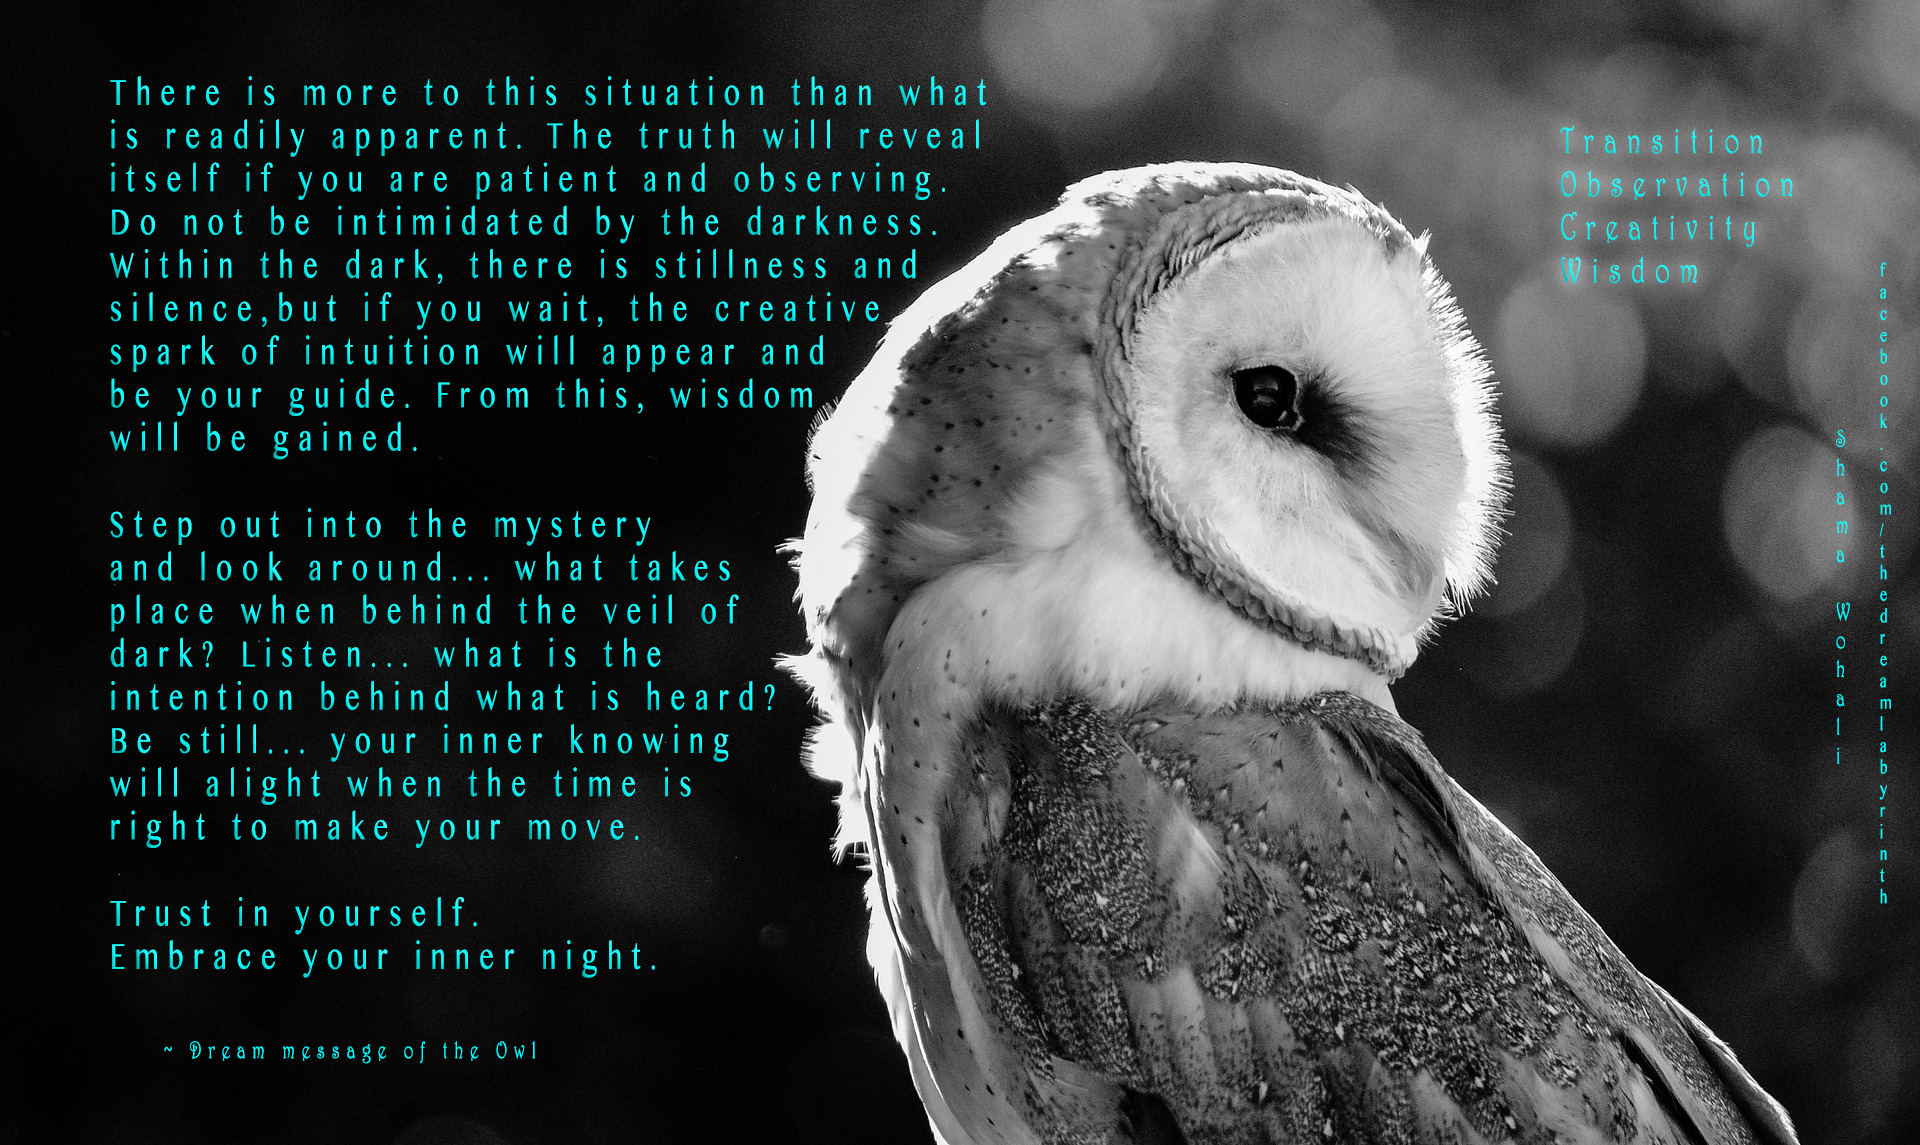 Dream Meaning of the Owl